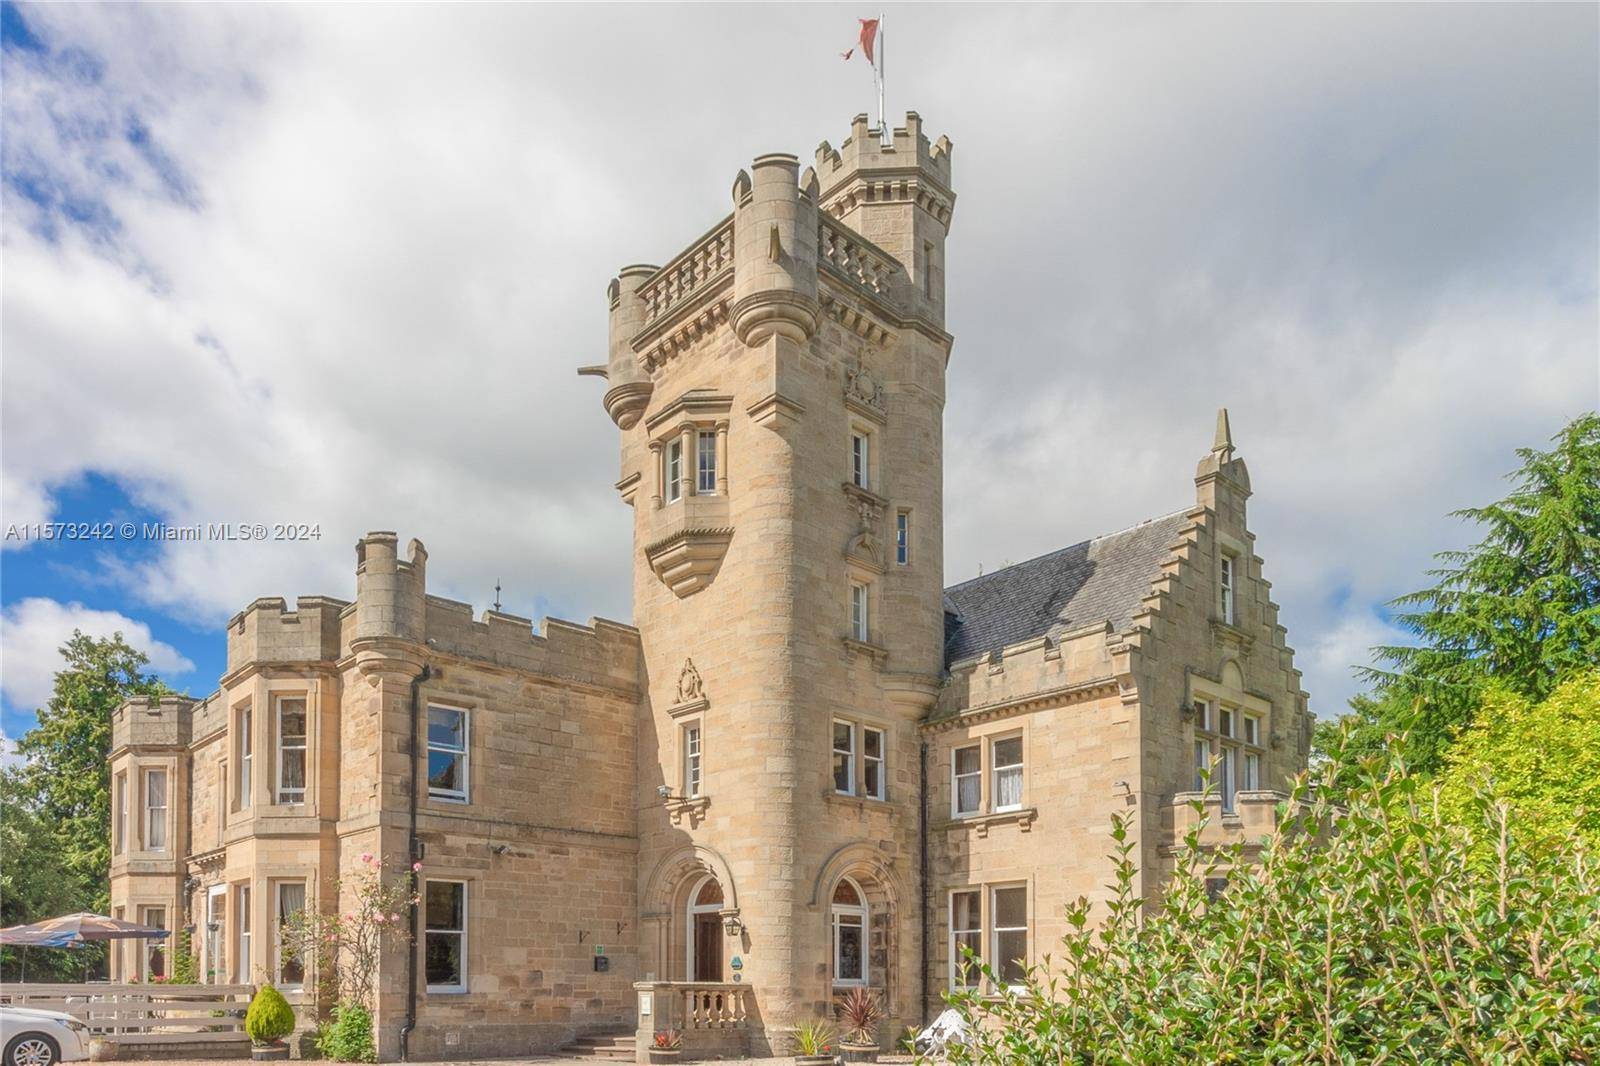 Live your fantasy in this storybook Castle Hotel in Scotland from the early 1800's.